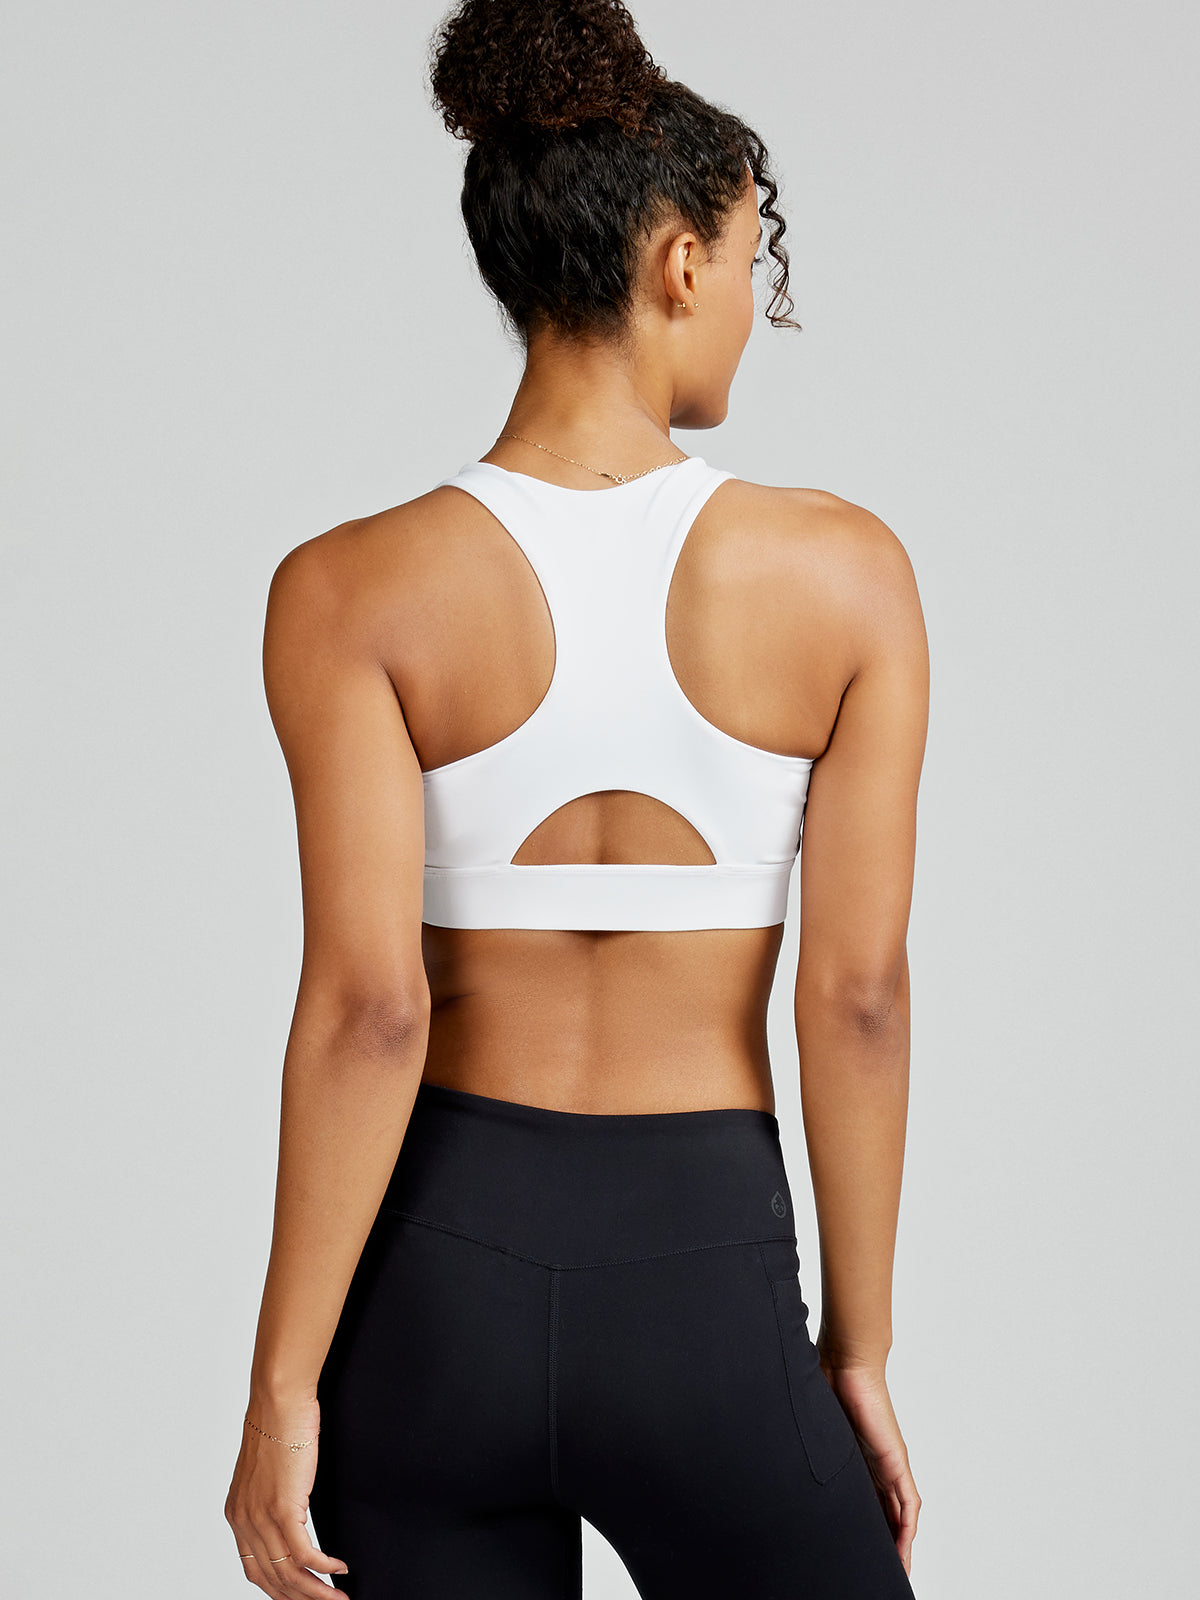 Introducing the Nike Pro Bra Collection 